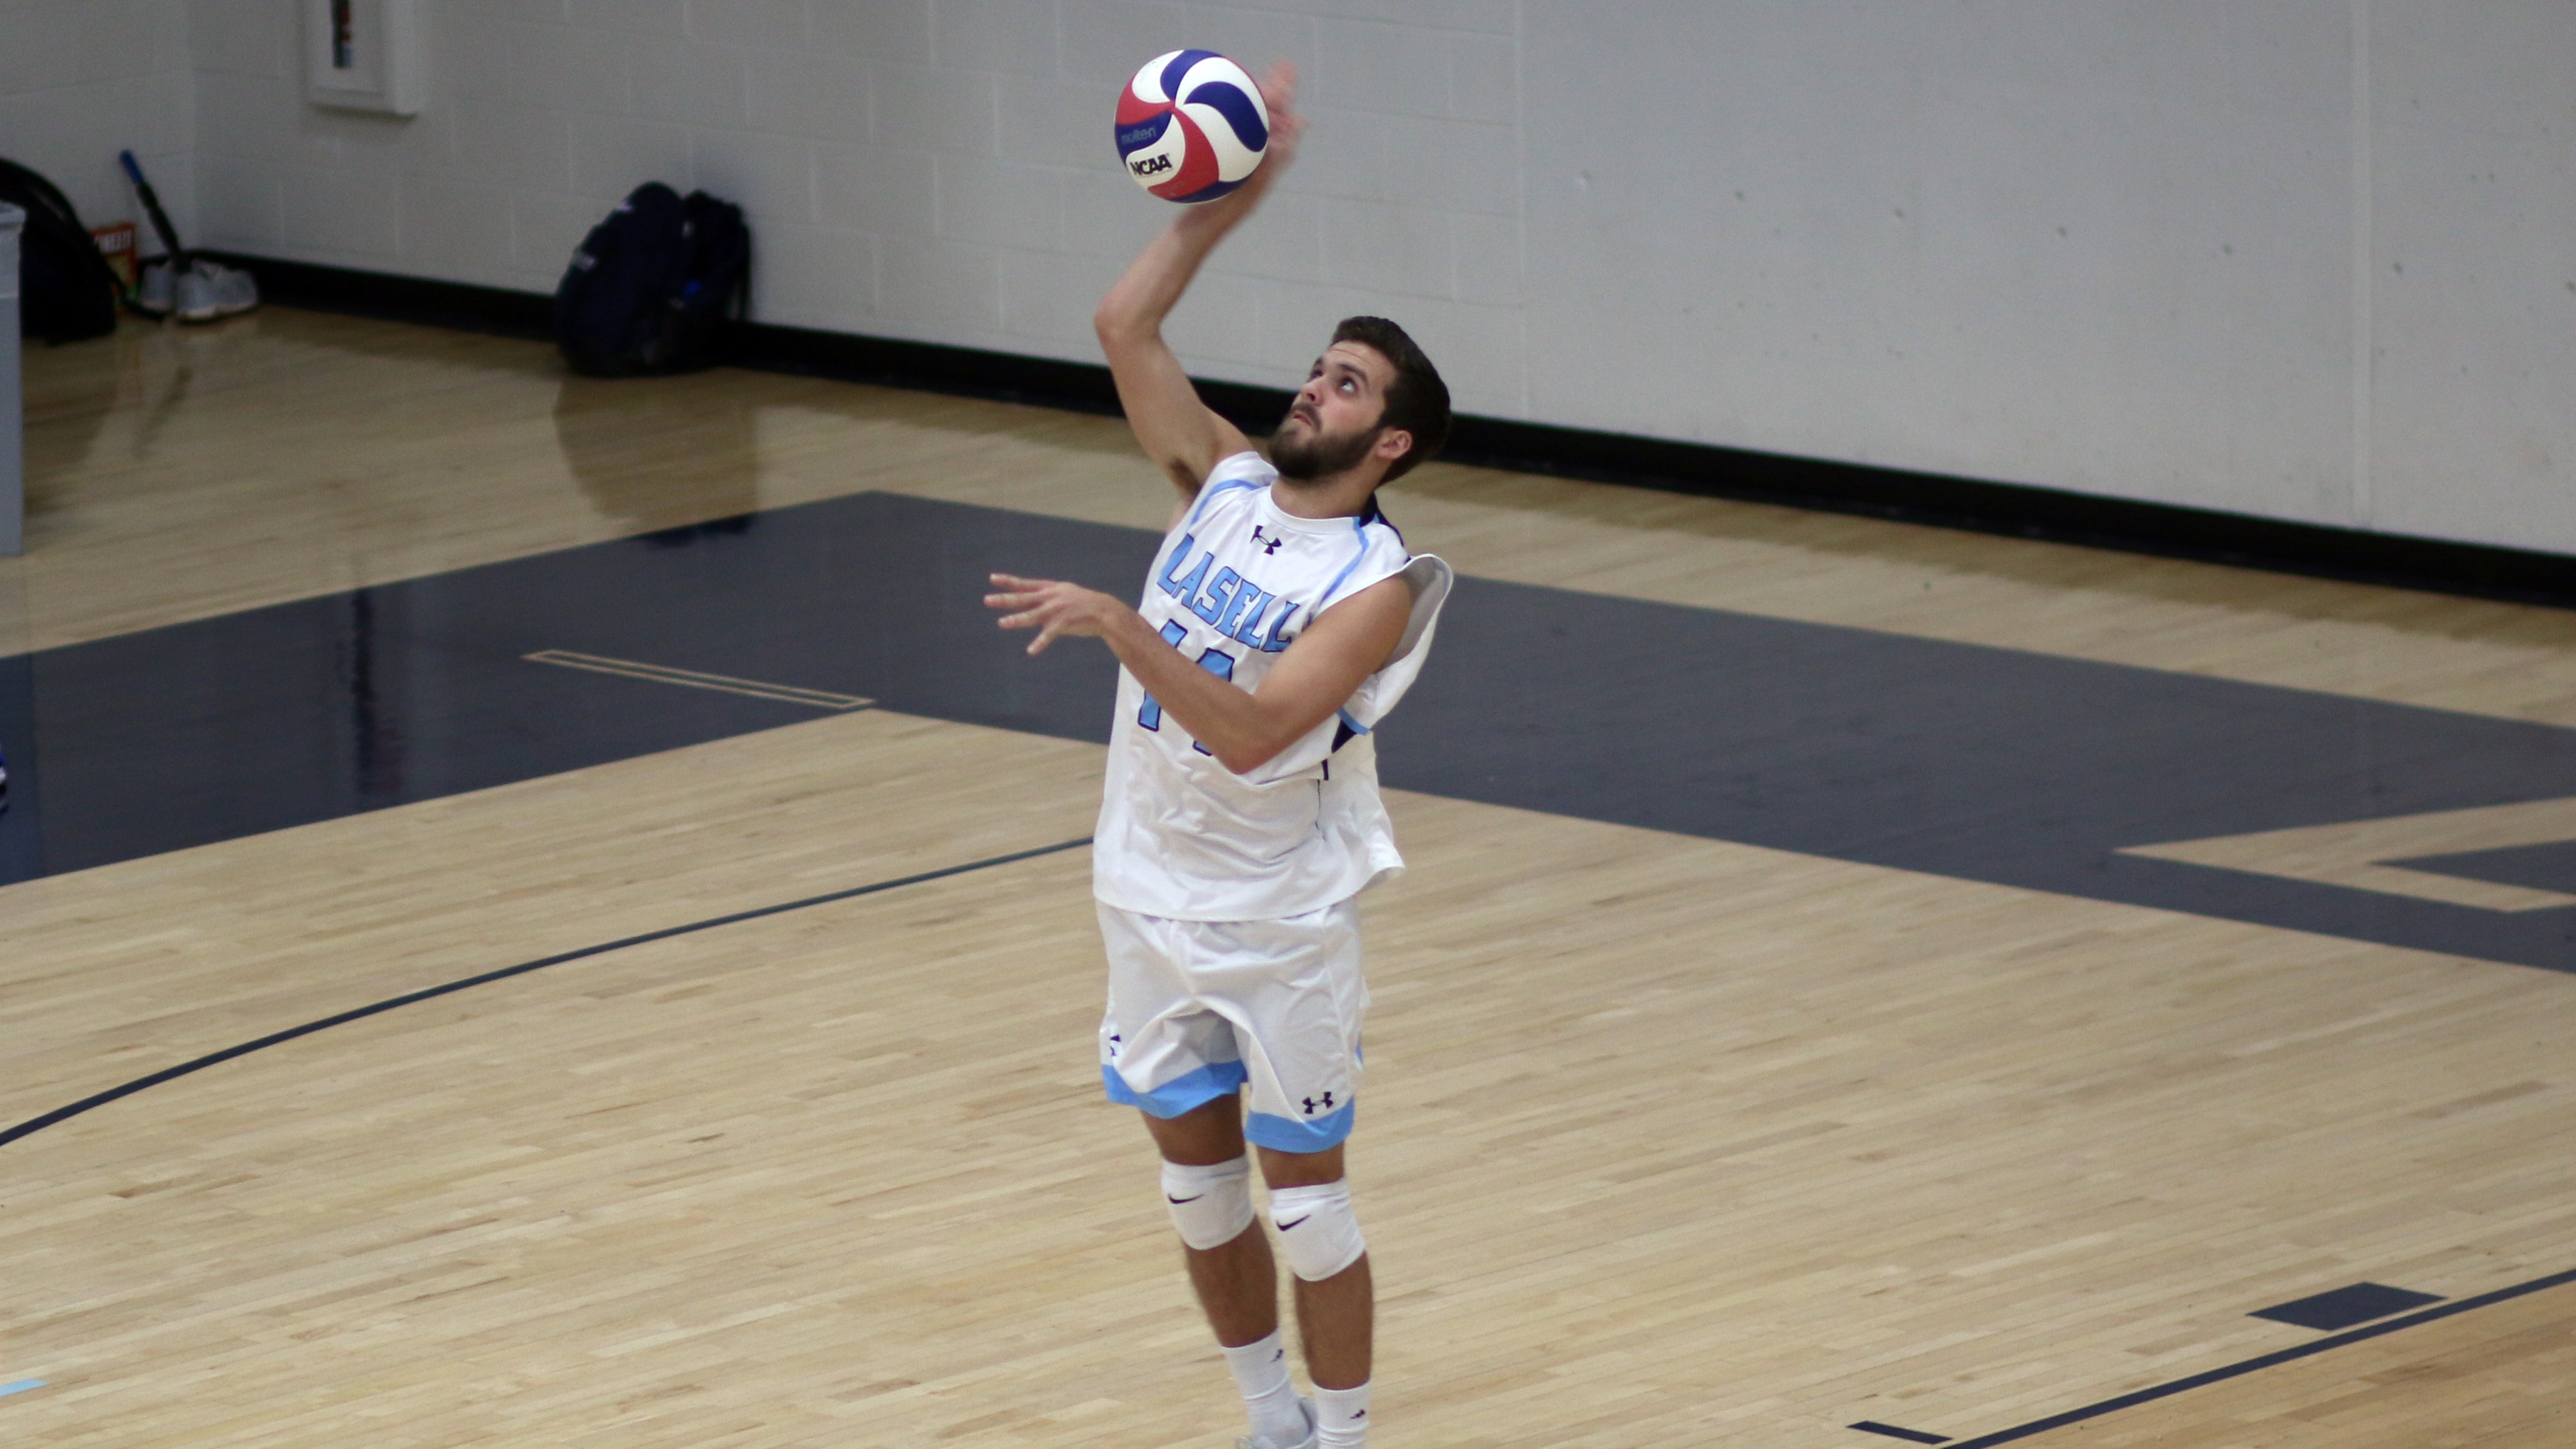 Lasell Men’s Volleyball falls in three sets at Emerson